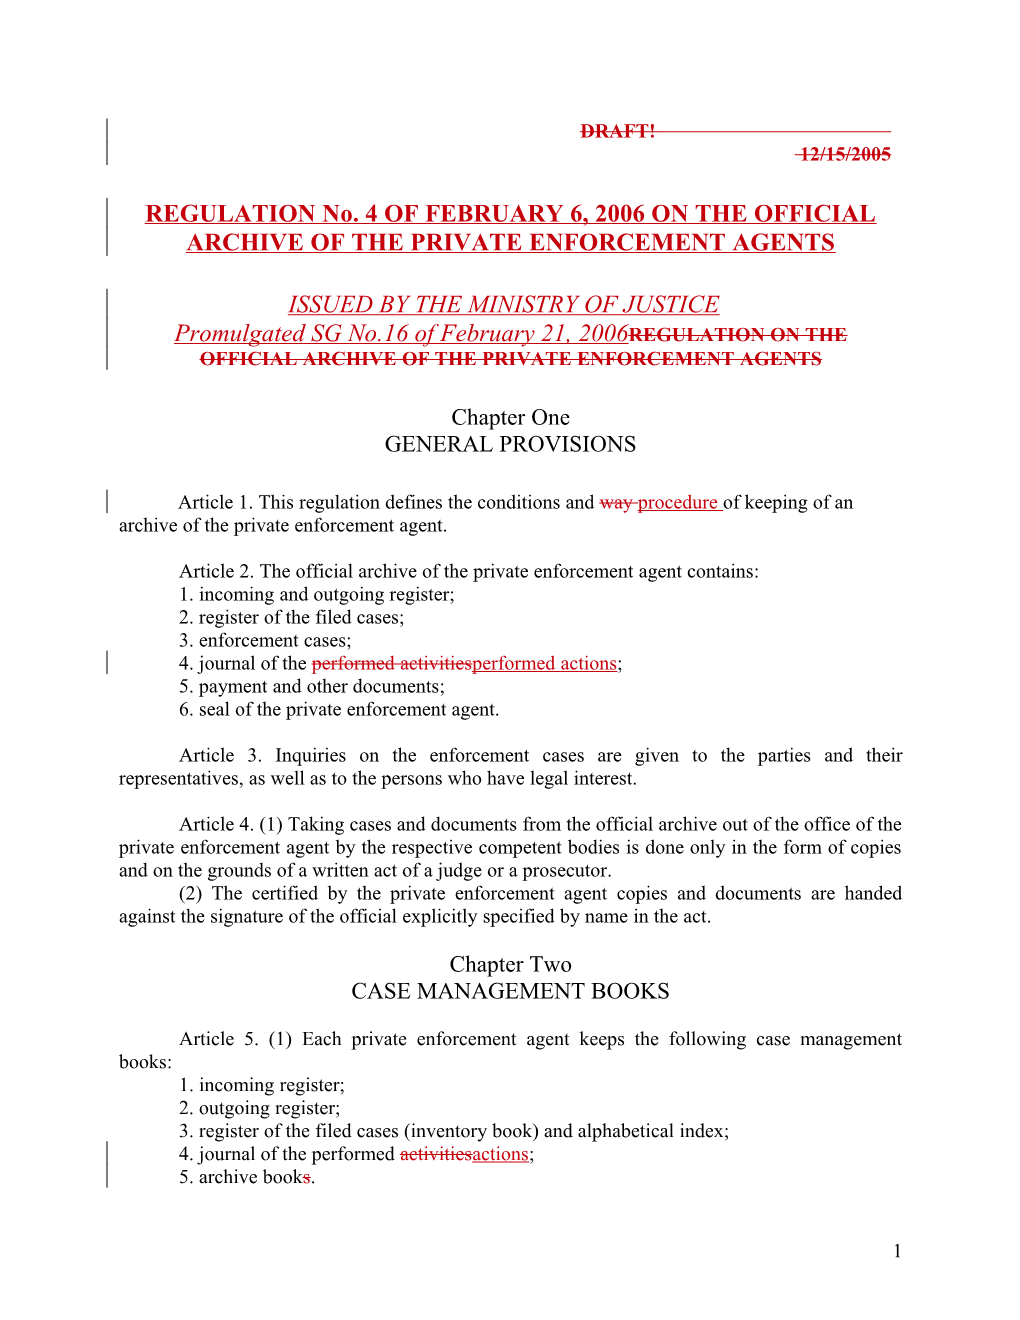 REGULATION No. 4 of FEBRUARY 6, 2006 on the OFFICIAL ARCHIVE of the PRIVATE ENFORCEMENT AGENTS